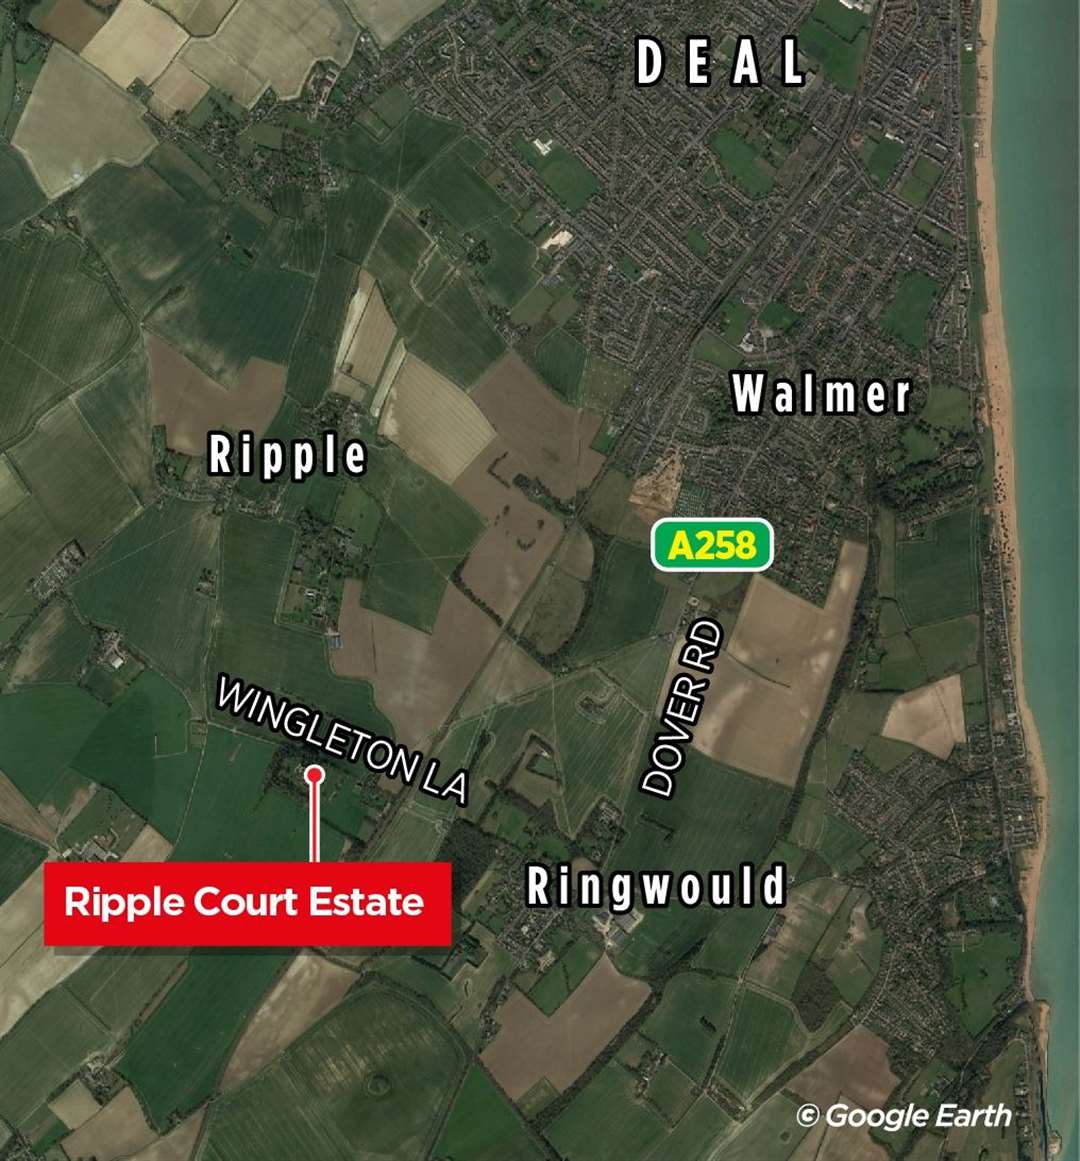 The Ripple Court Estate goes across 12 acres